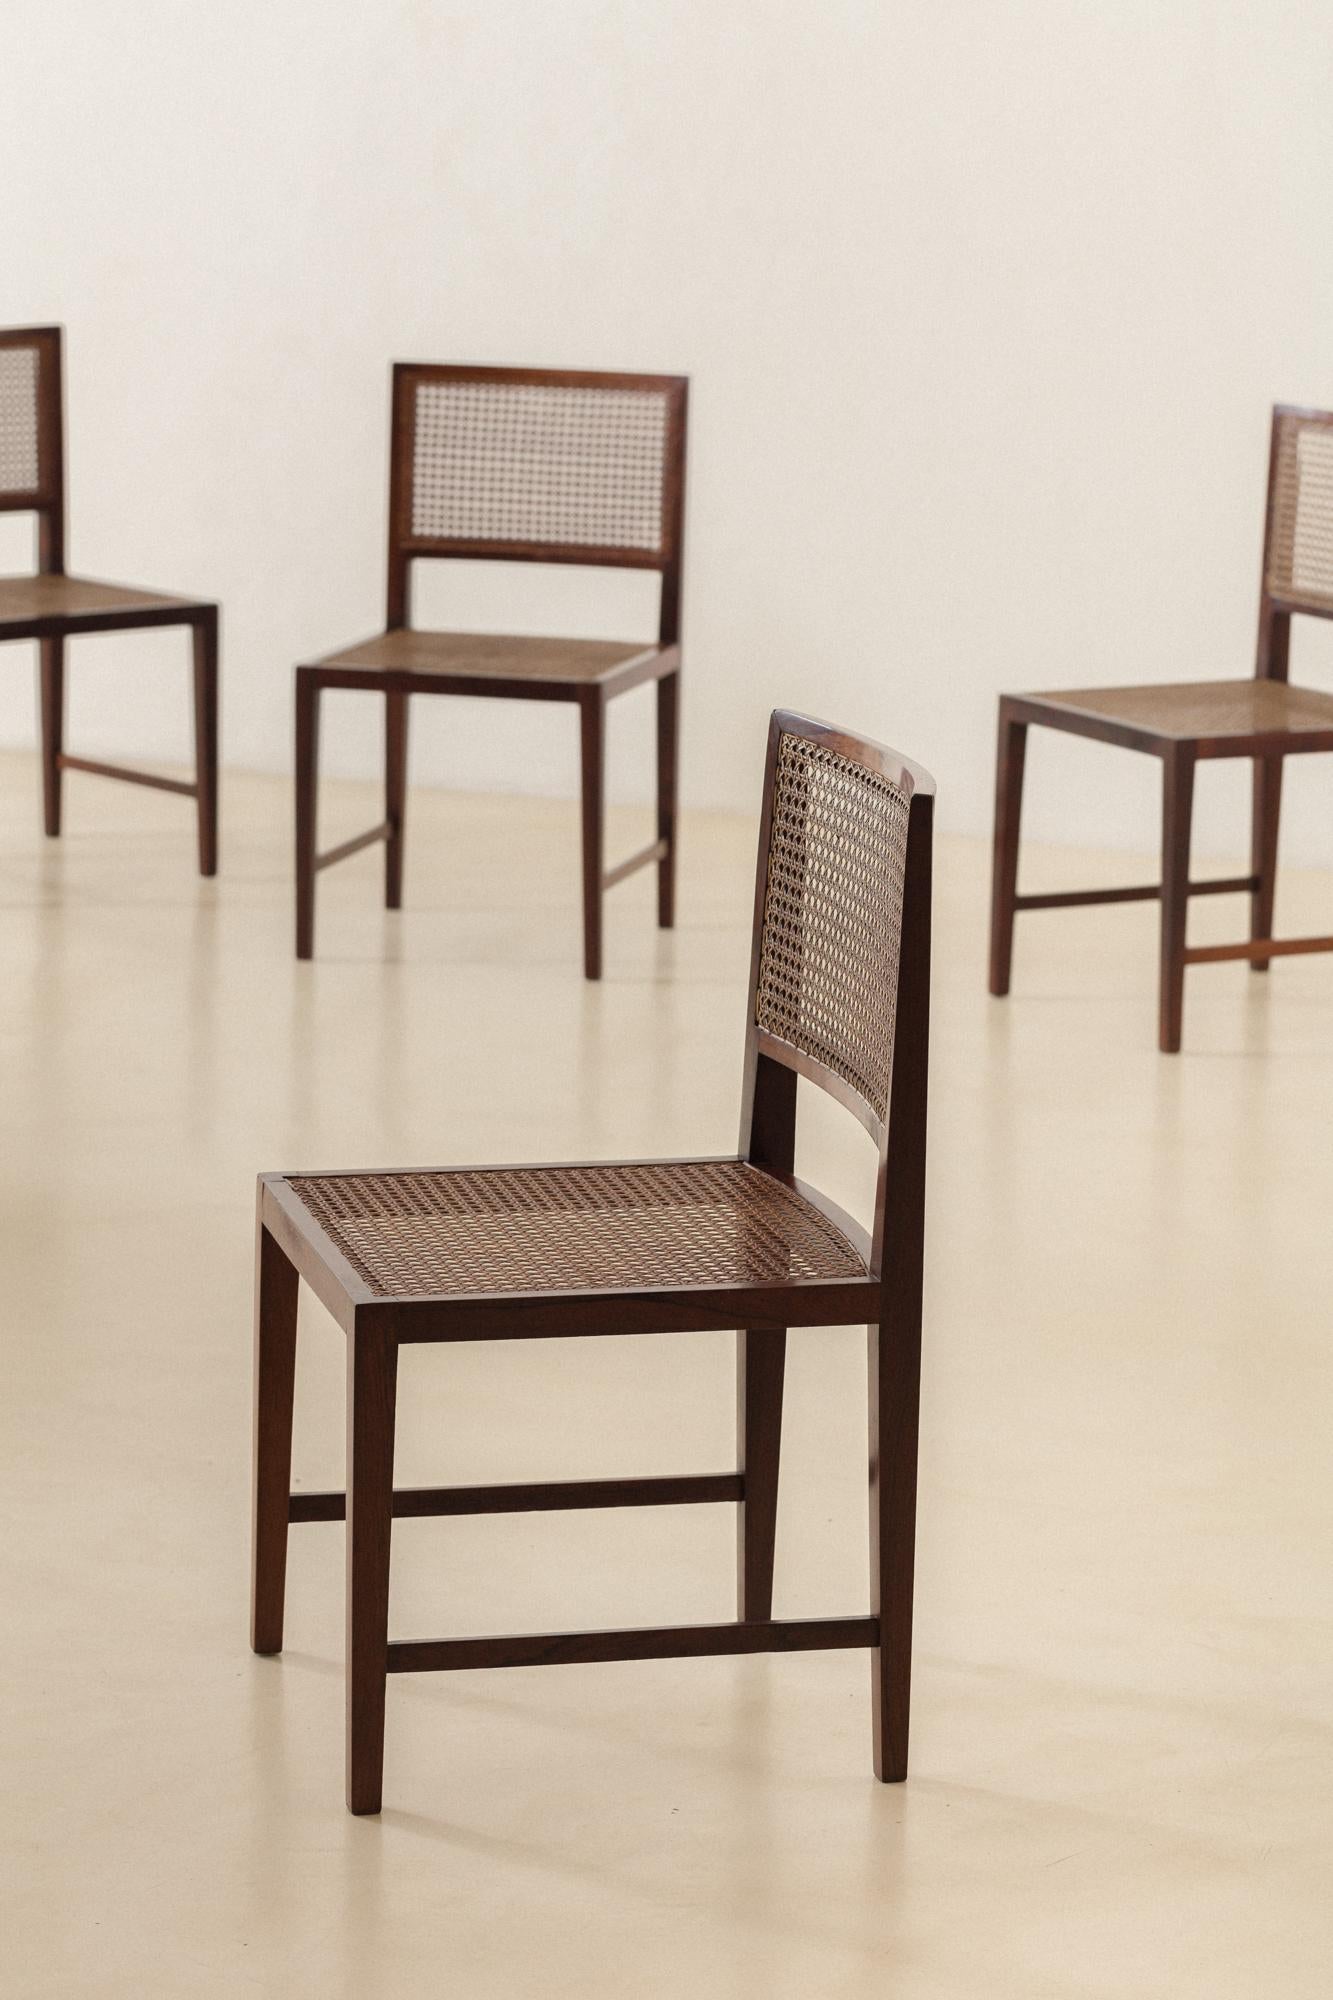 ML Magalhães produced this set of eight dining chairs in the 1960s. The pieces have solid Rosewood structure and seats and backrests in natural plaited cane. 

With rectangular forms and corners in almost all the structure, one beautiful detail to